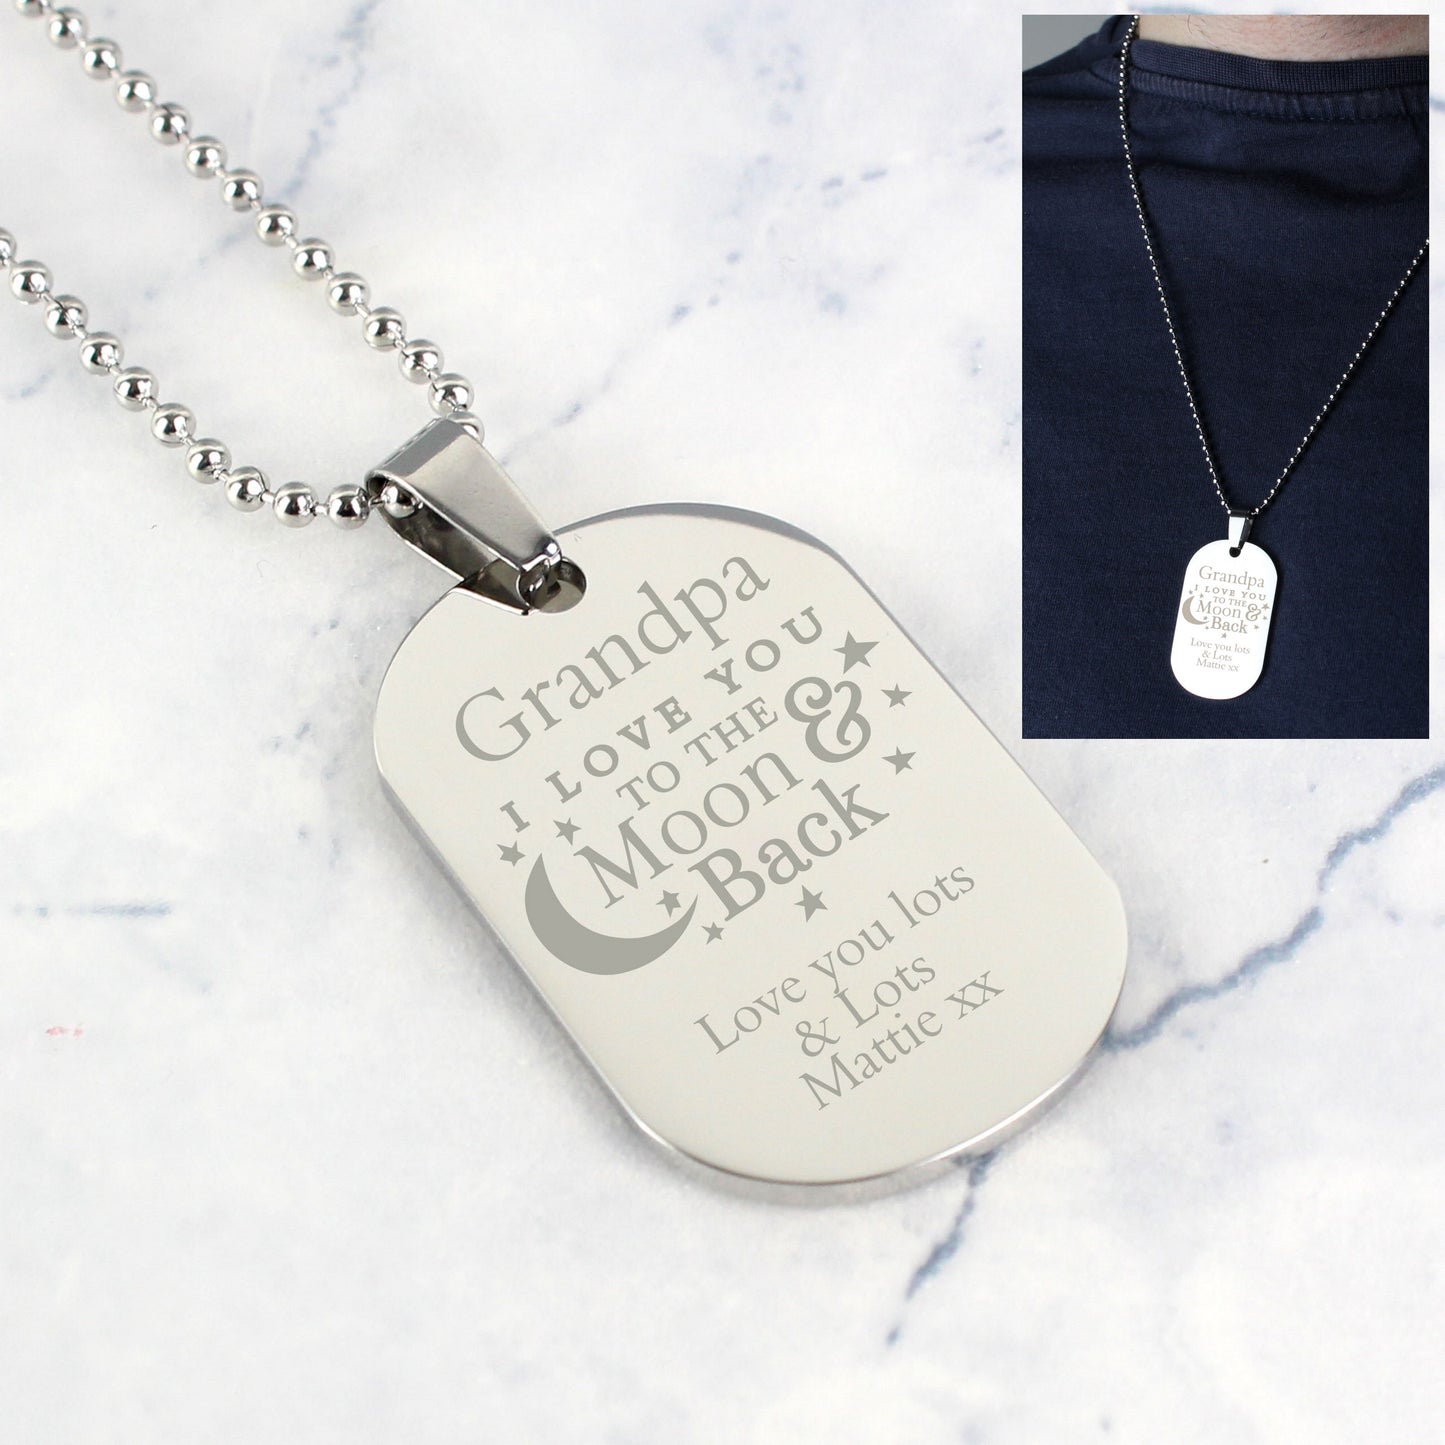 Personalised 'To The Moon & Back...' Stainless Steel Dog Tag Necklace - Personalise It!